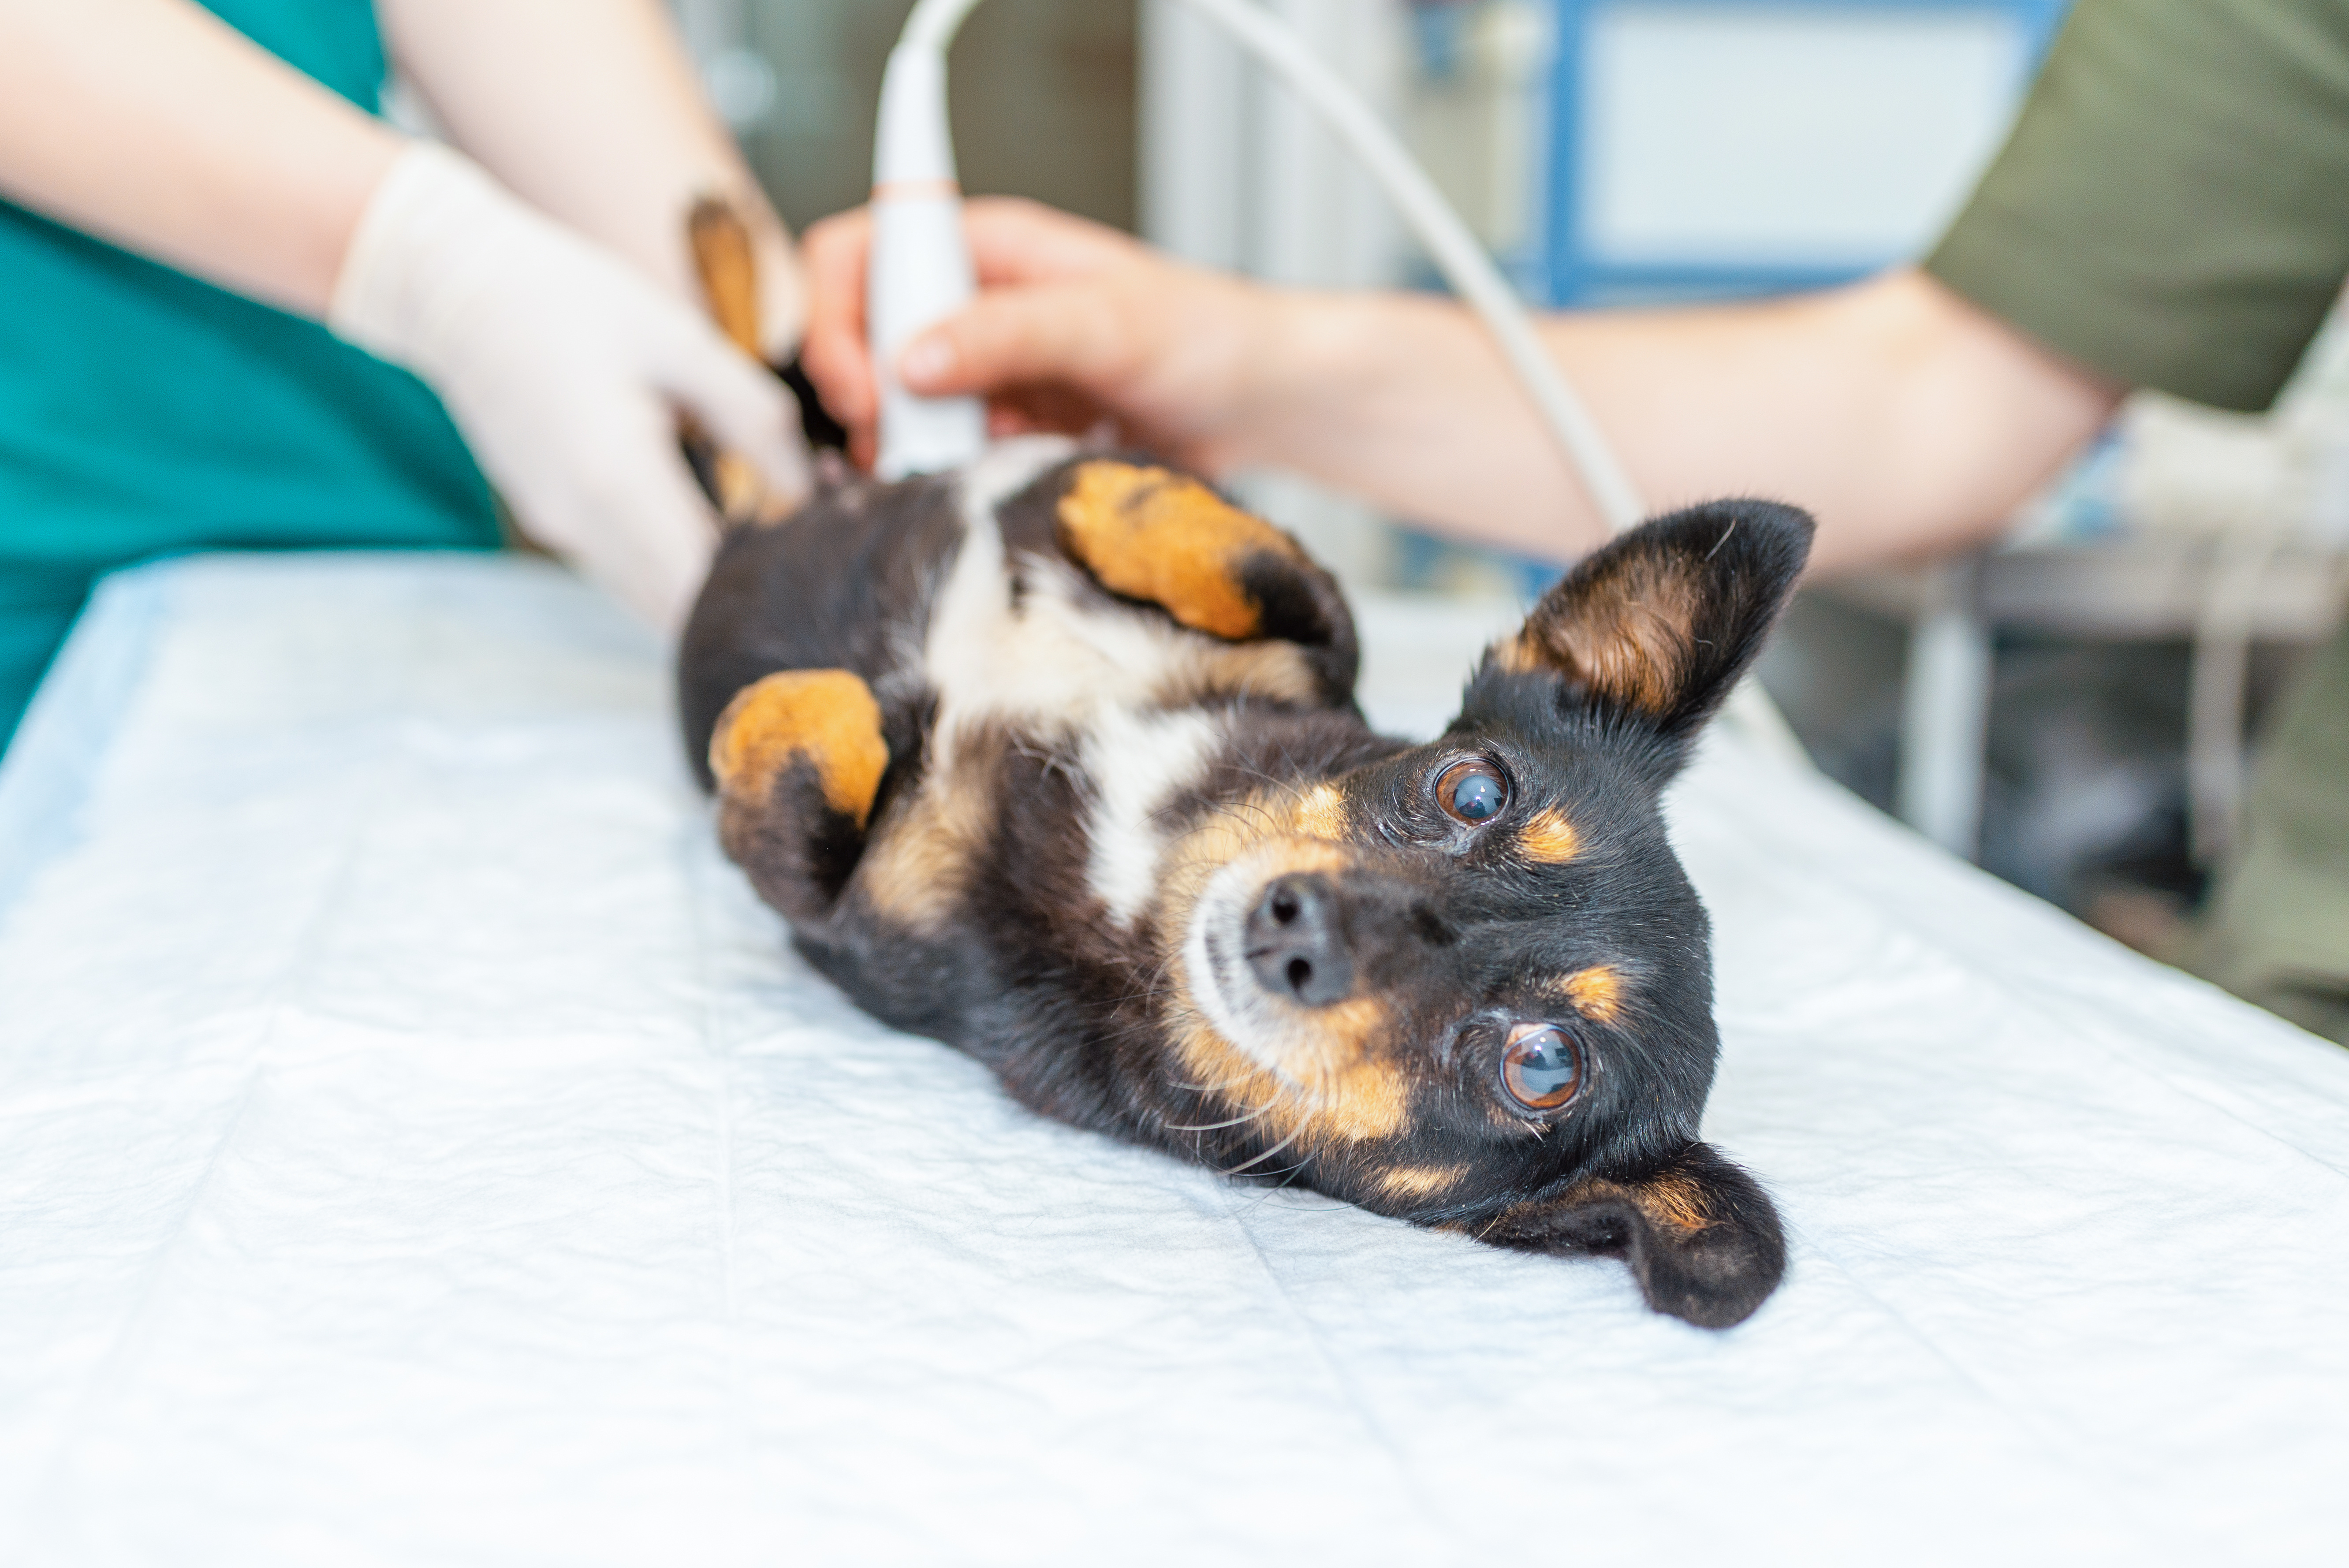 C-Sections in Dogs